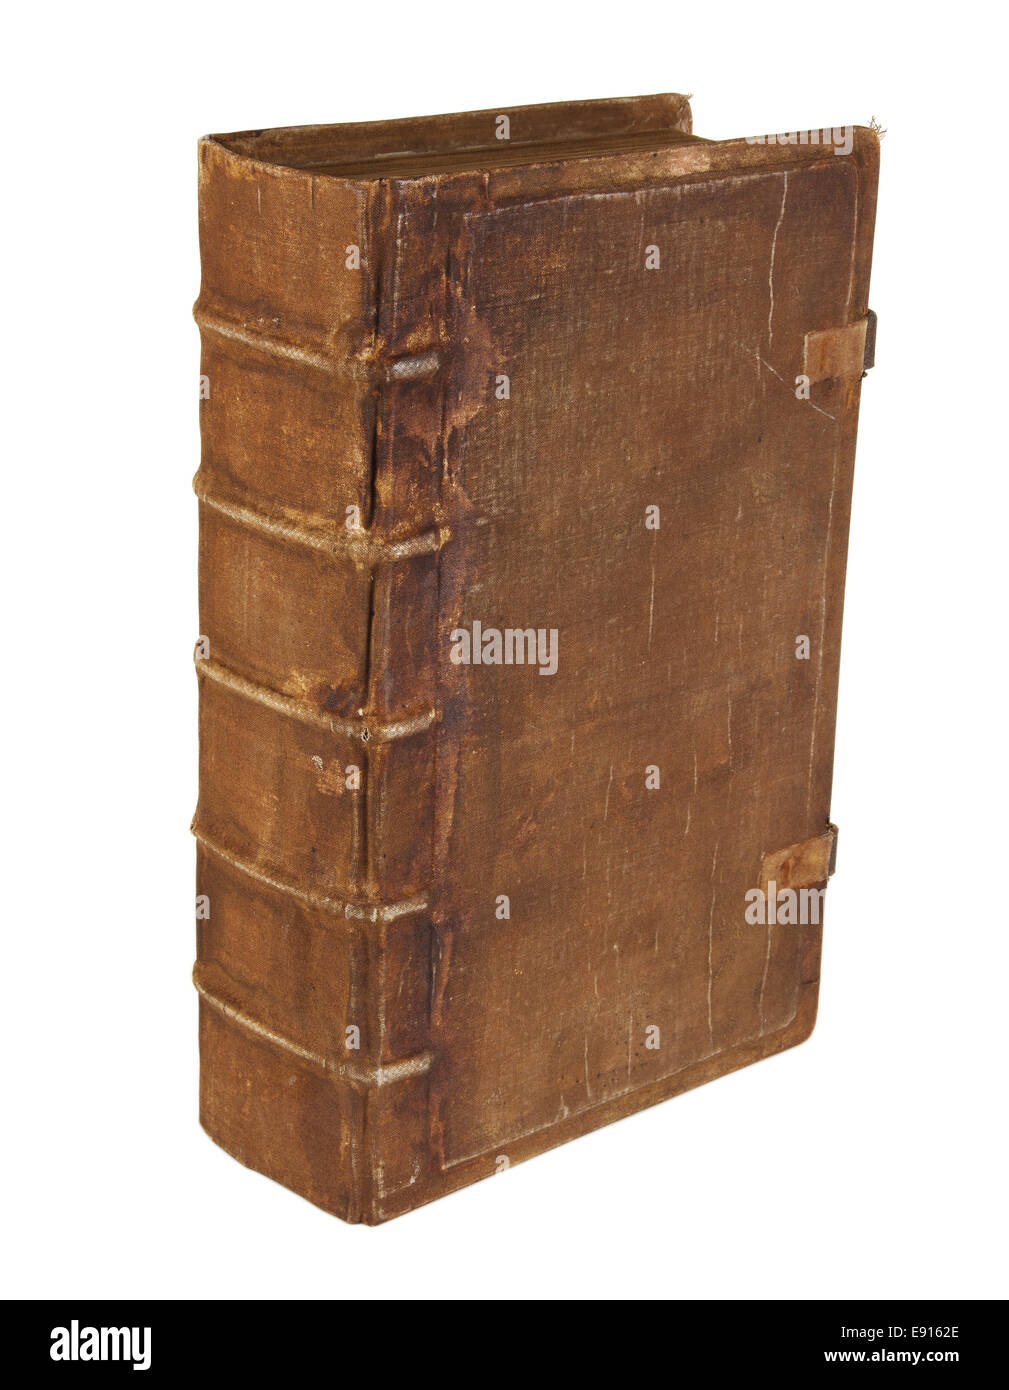 The ancient book Stock Photo